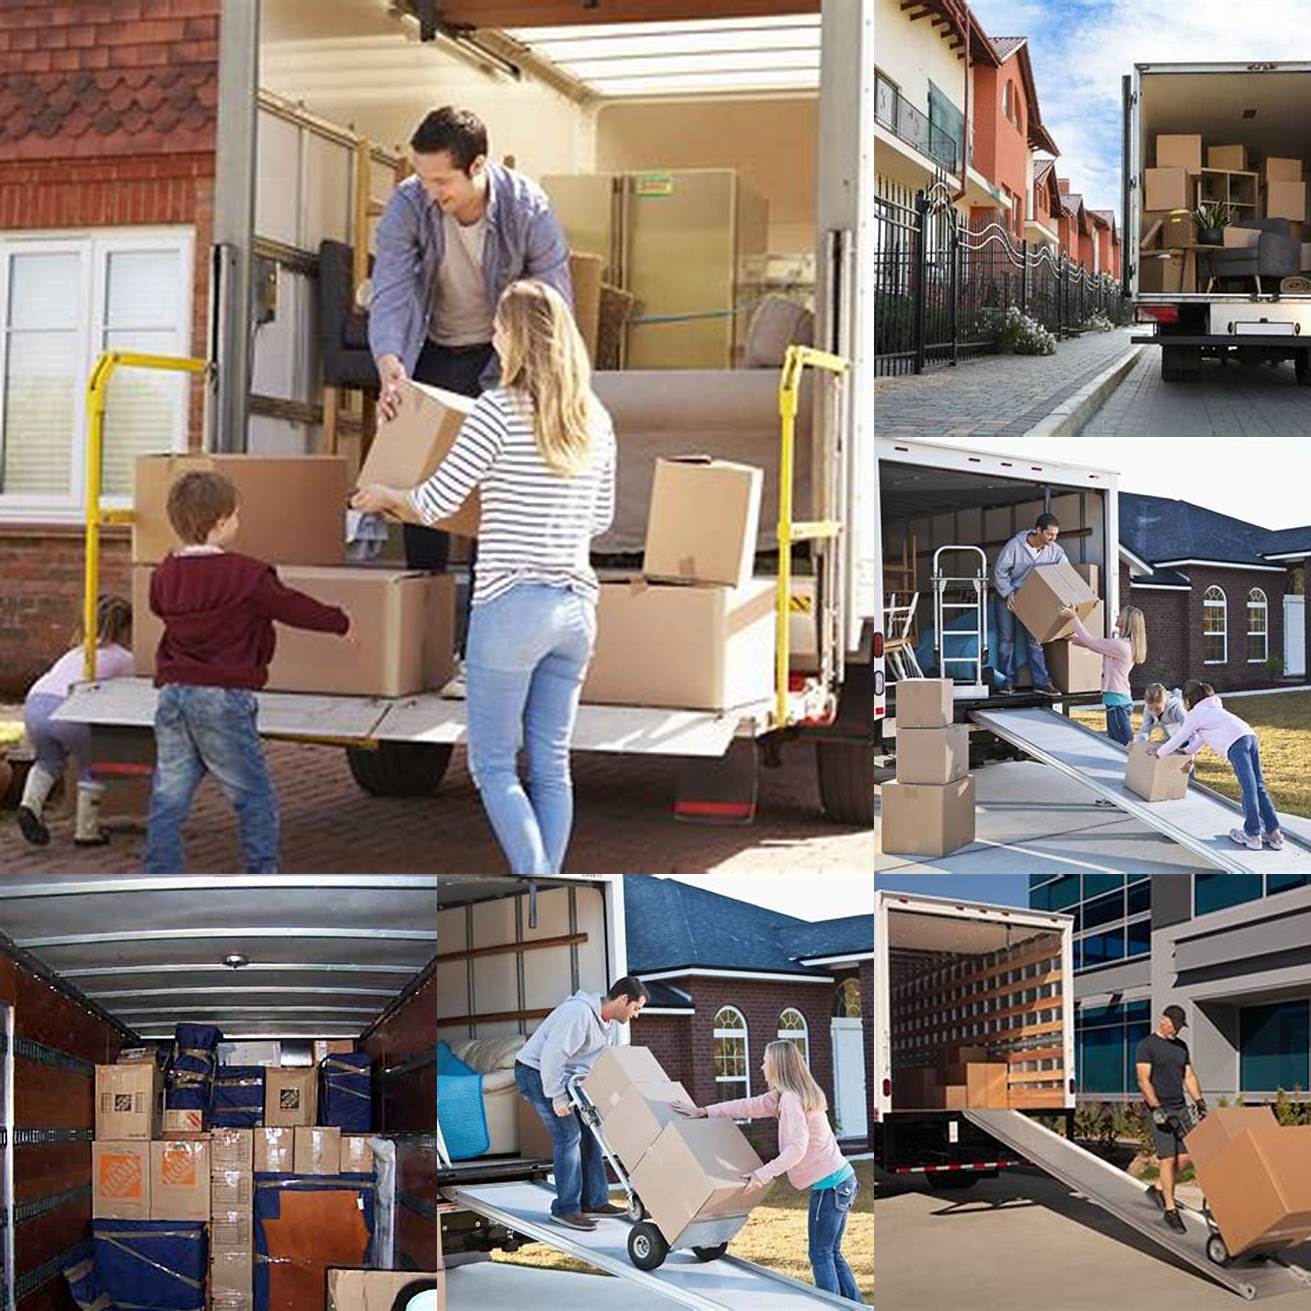 Image of furniture being loaded onto a moving truck